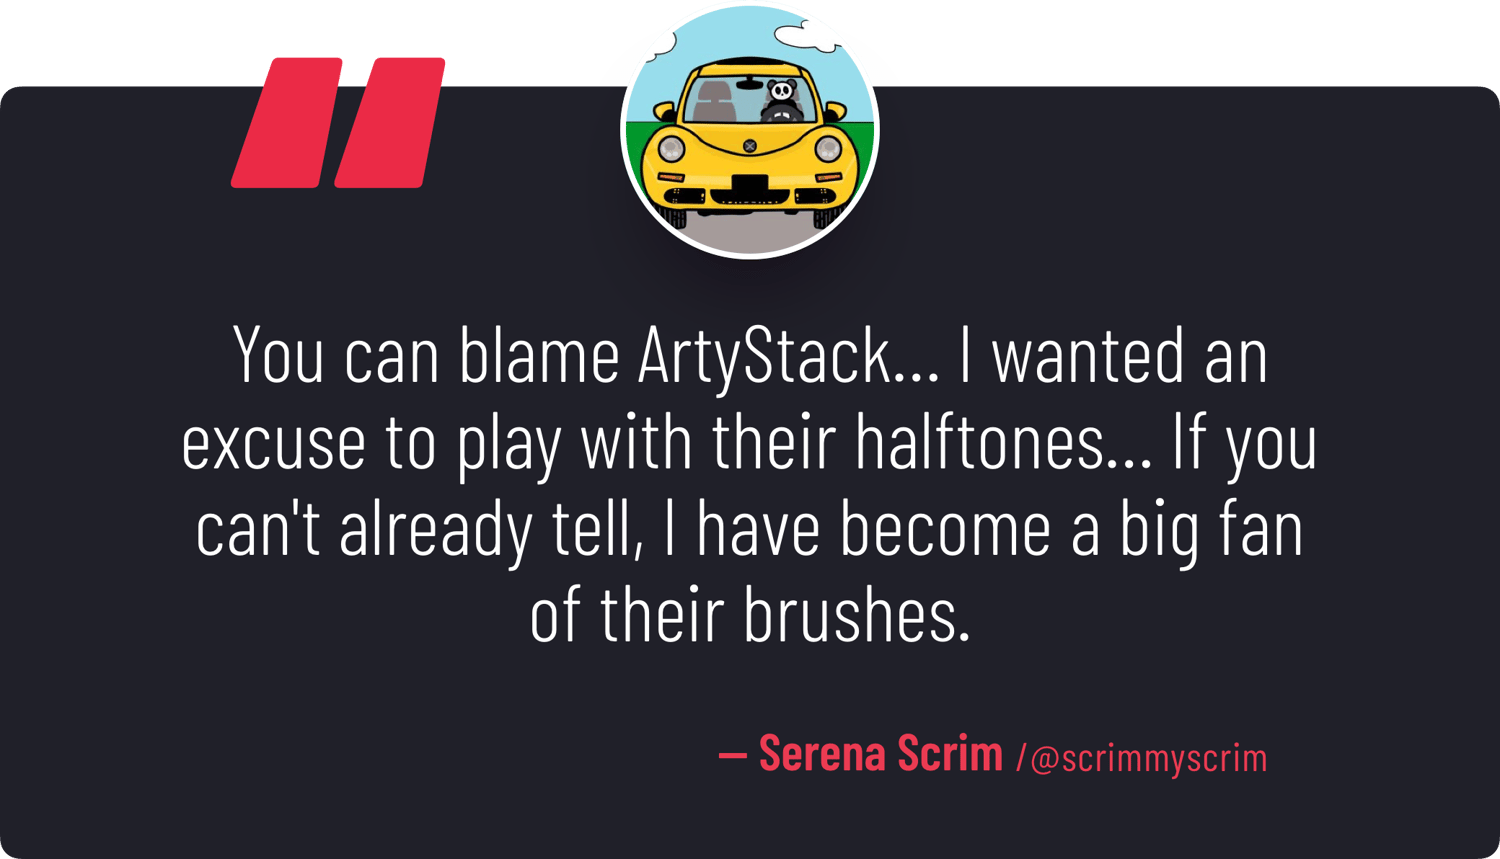 "You can blame ArtyStack… I wanted an excuse to play with their halftones… If you can't already tell, I have become a big fan of their brushes." — Serena Scrim